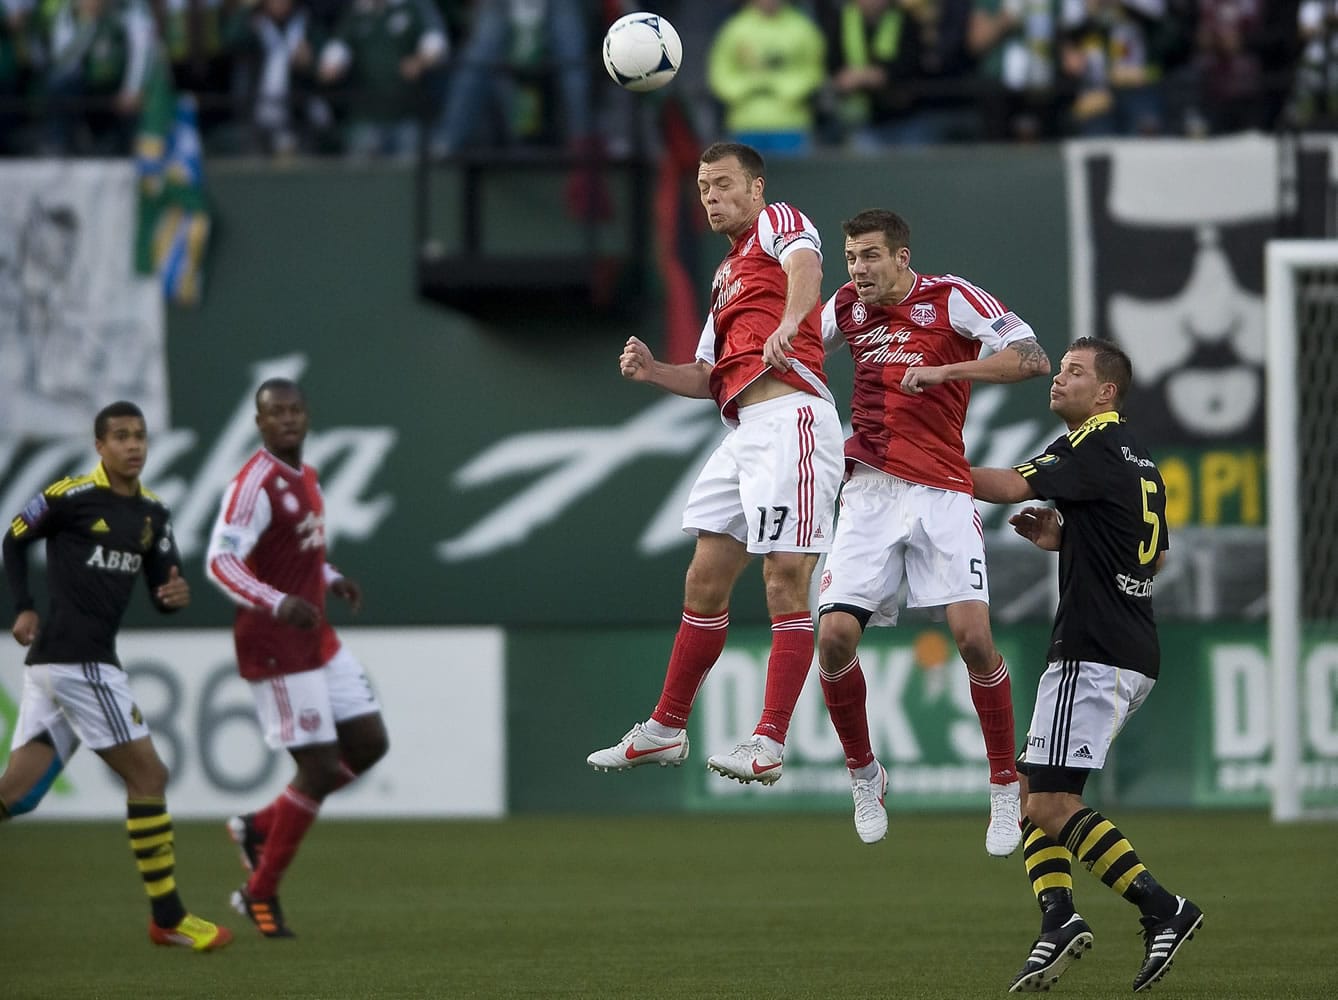 Timbers captain Jack Jewsbury (13) knows there are big expectations this season and he's eager for the challenge.